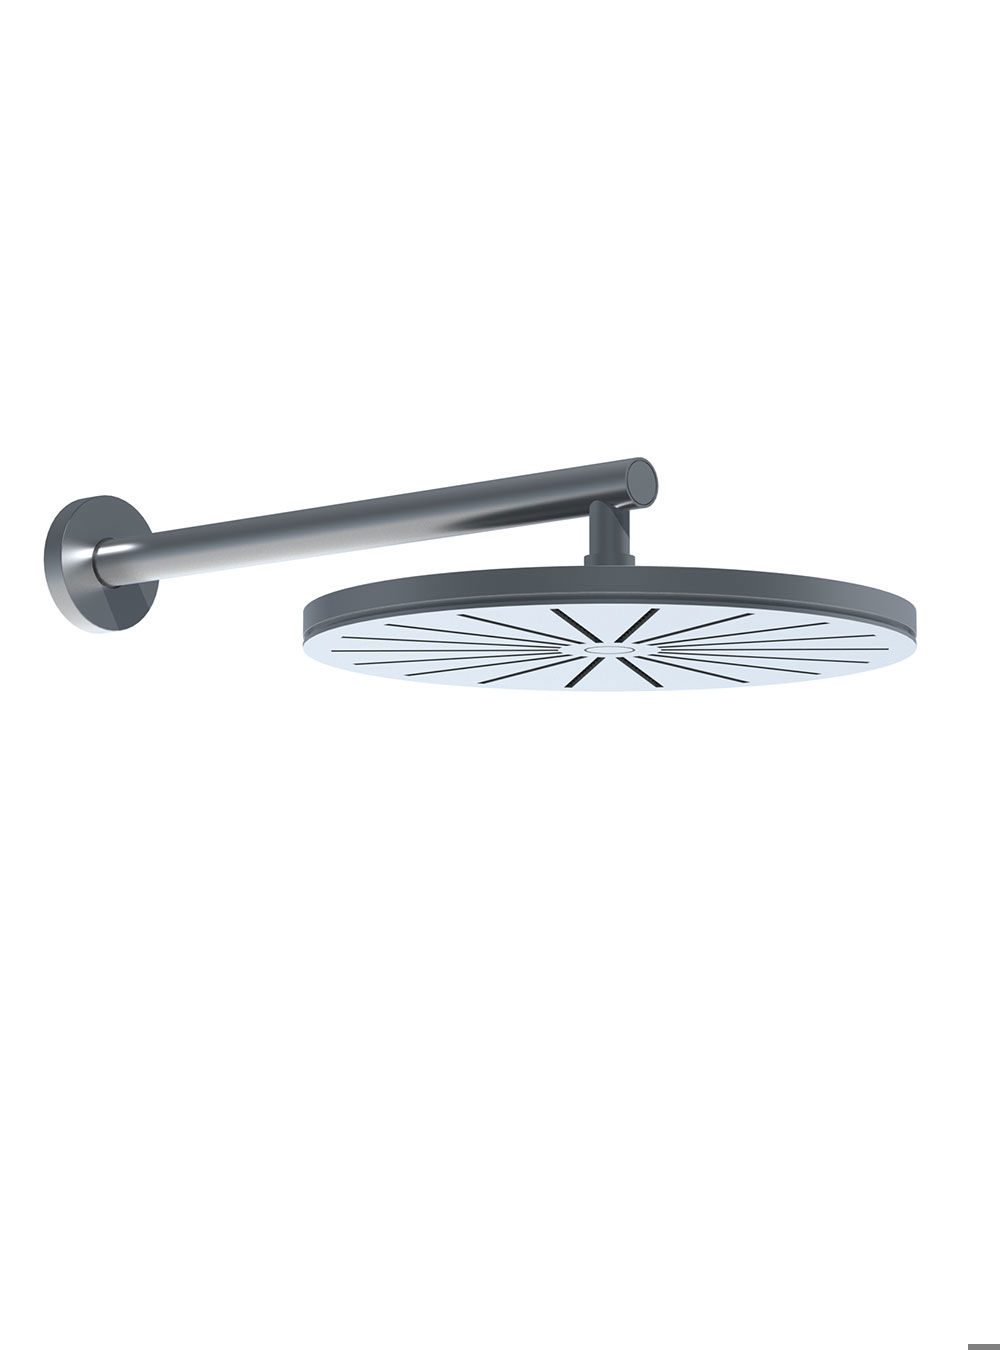 060-100: Head shower, round, wall-mounted, less 100 mm.